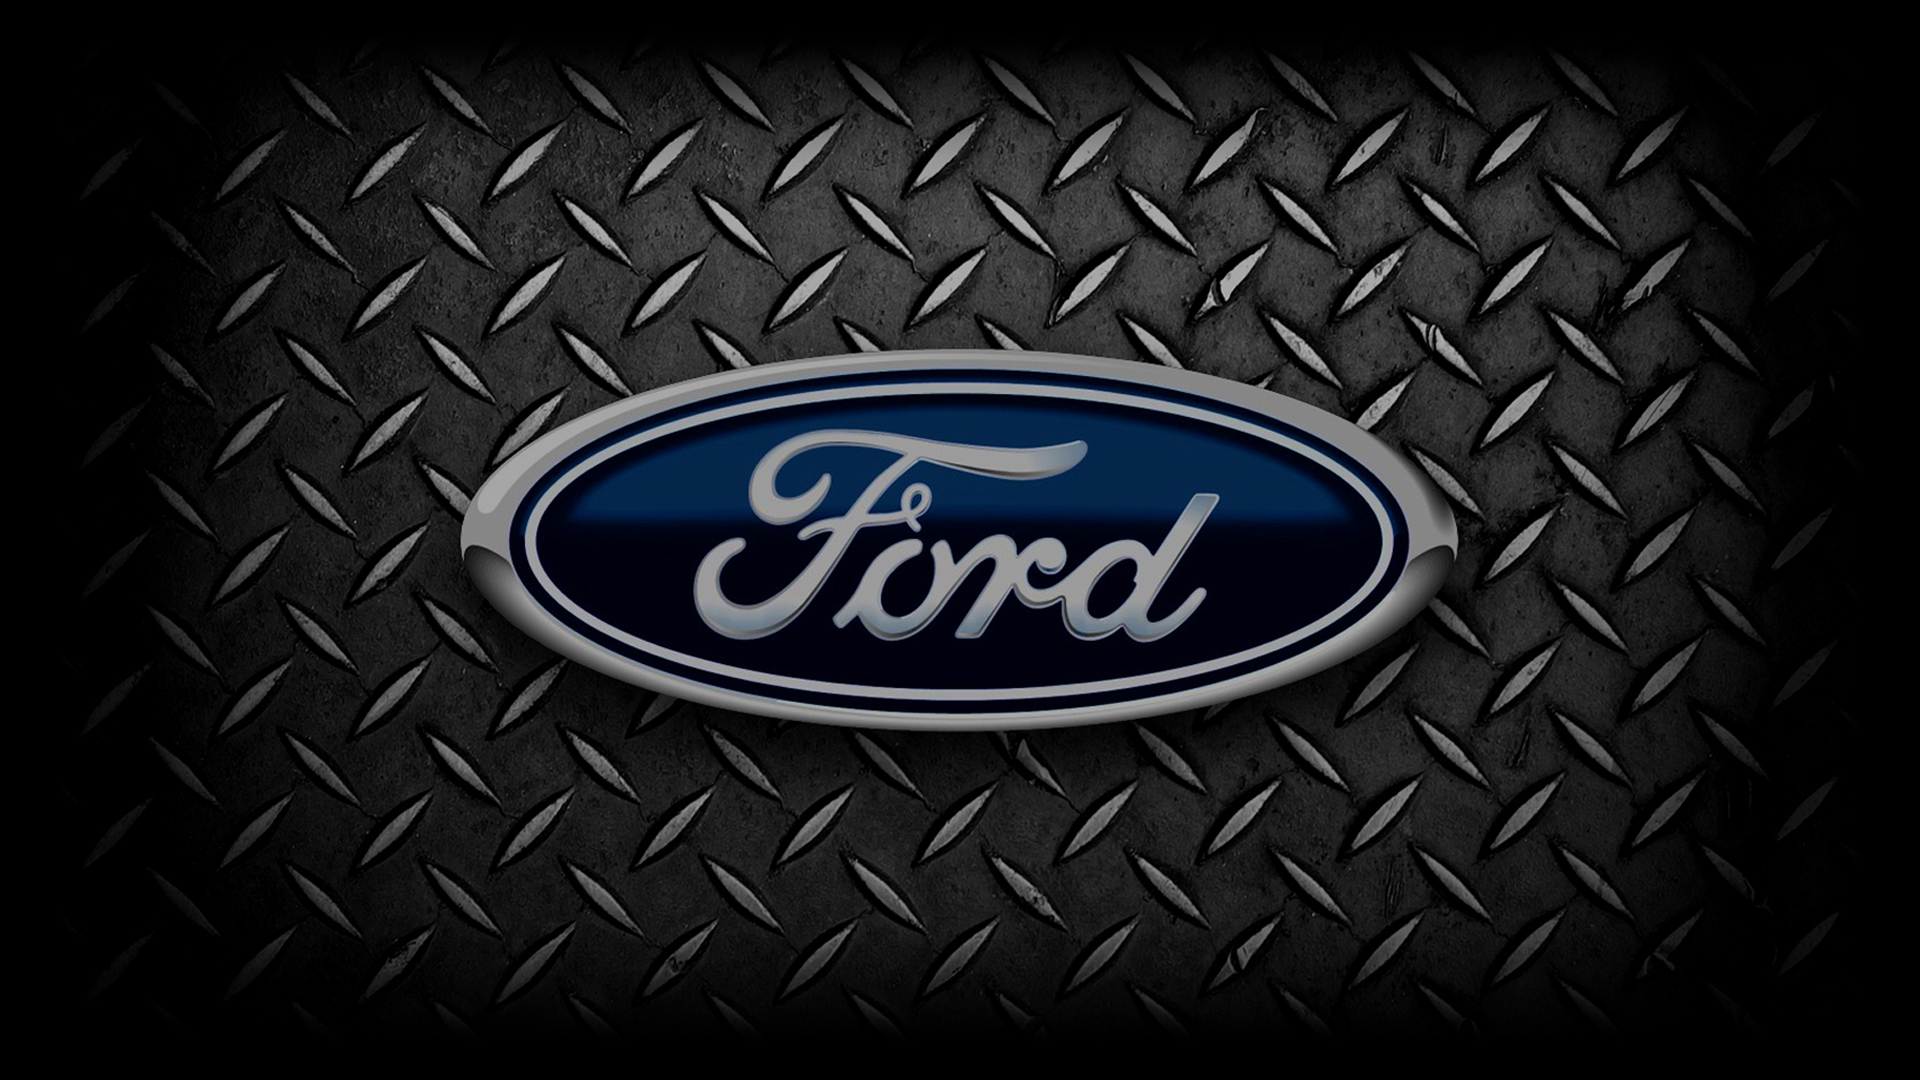 Ford Wallpaper backgrounds In HD for Download 1920x1080